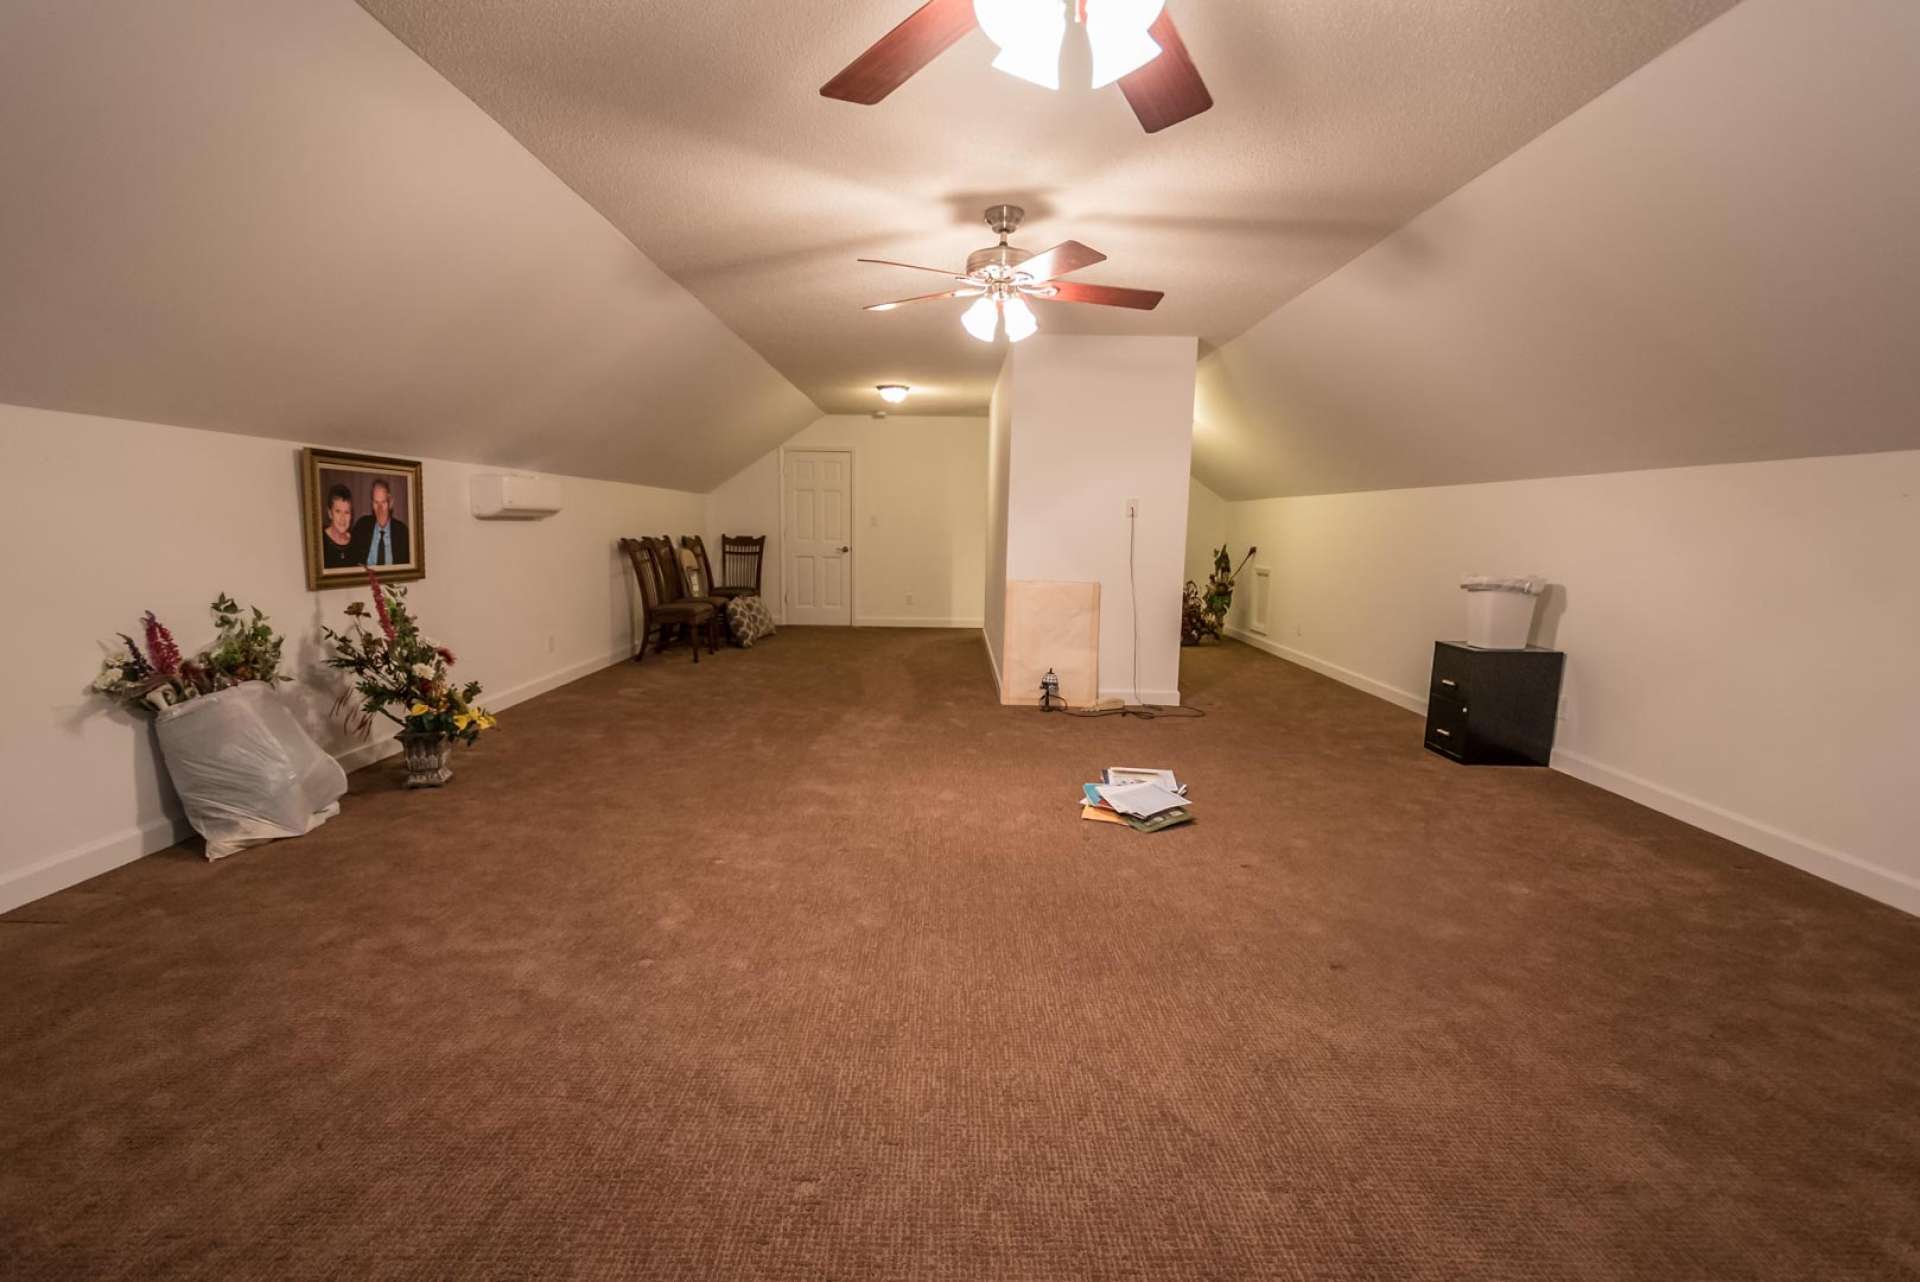 The upper level offers a large bonus room with many options, such as a play room, studio, or additional sleeping space.